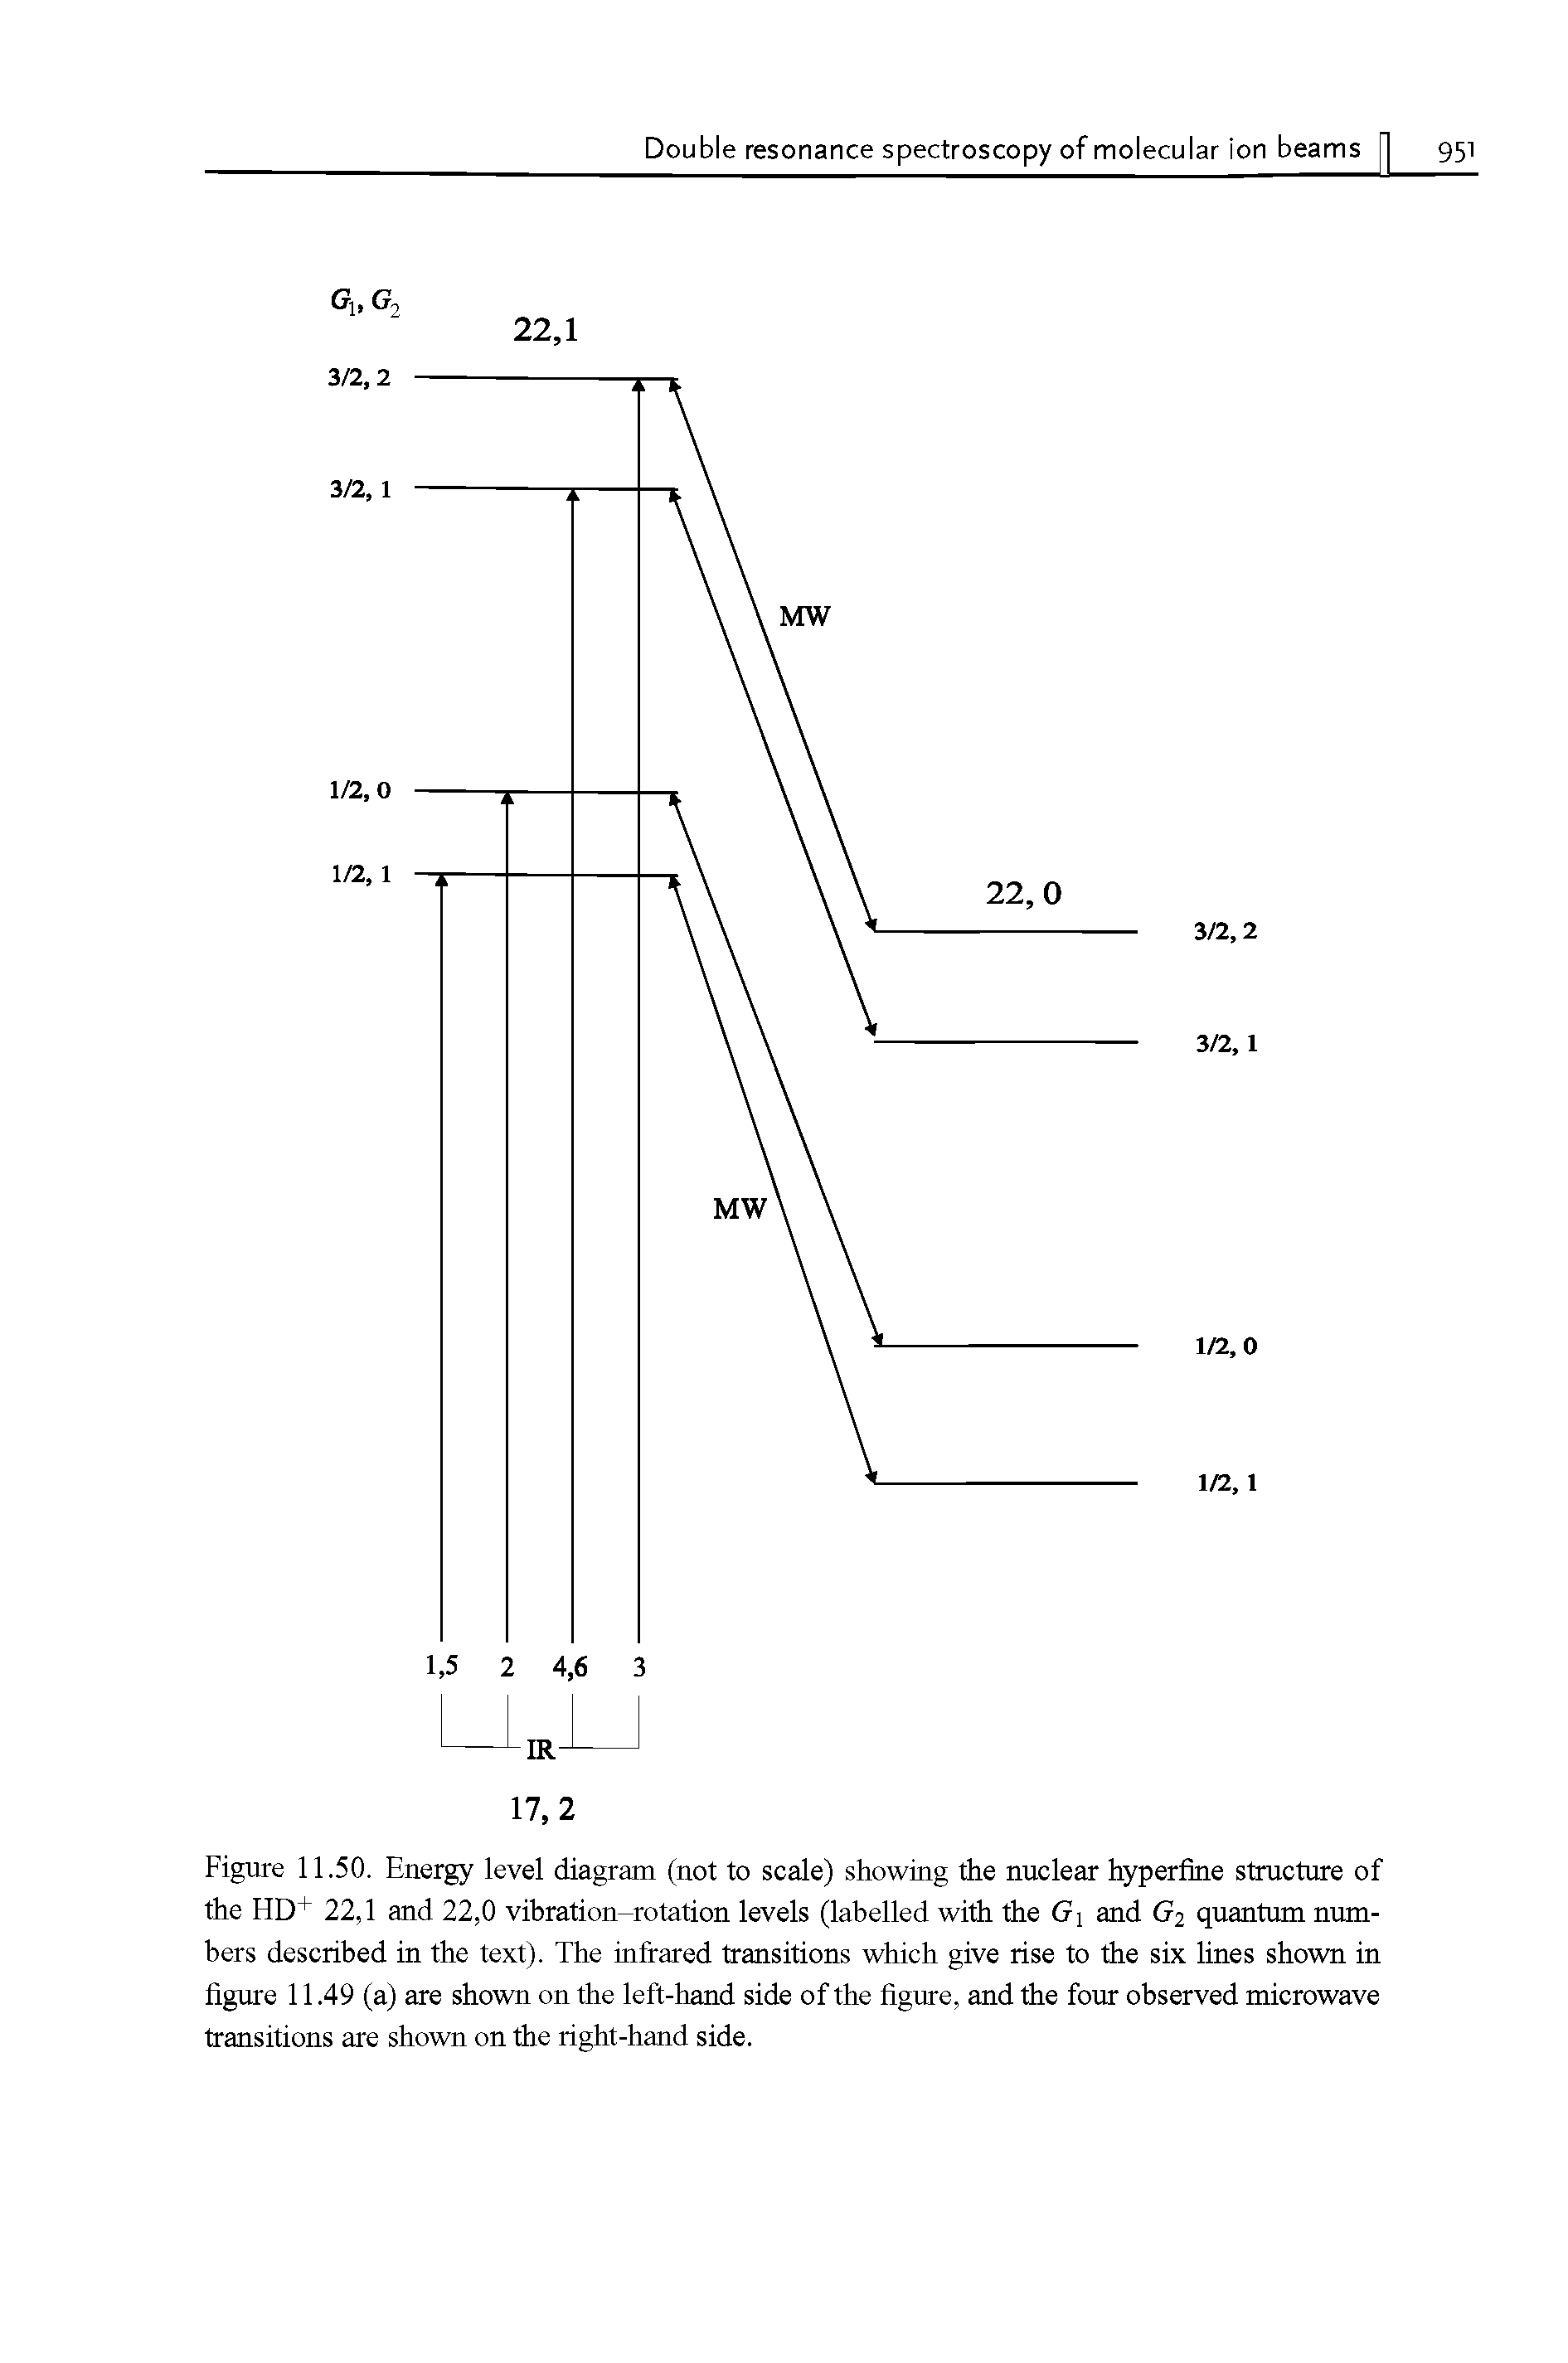 Figure 11.50. Energy level diagram (not to scale) showing the nuclear hyperfine structure of the HD+ 22,1 and 22,0 vibration-rotation levels (labelled with the G and G2 quantum numbers described in the text). The infrared transitions which give rise to the six lines shown in figure 11.49 (a) are shown on the left-hand side of the figure, and the four observed microwave transitions are shown on the right-hand side.